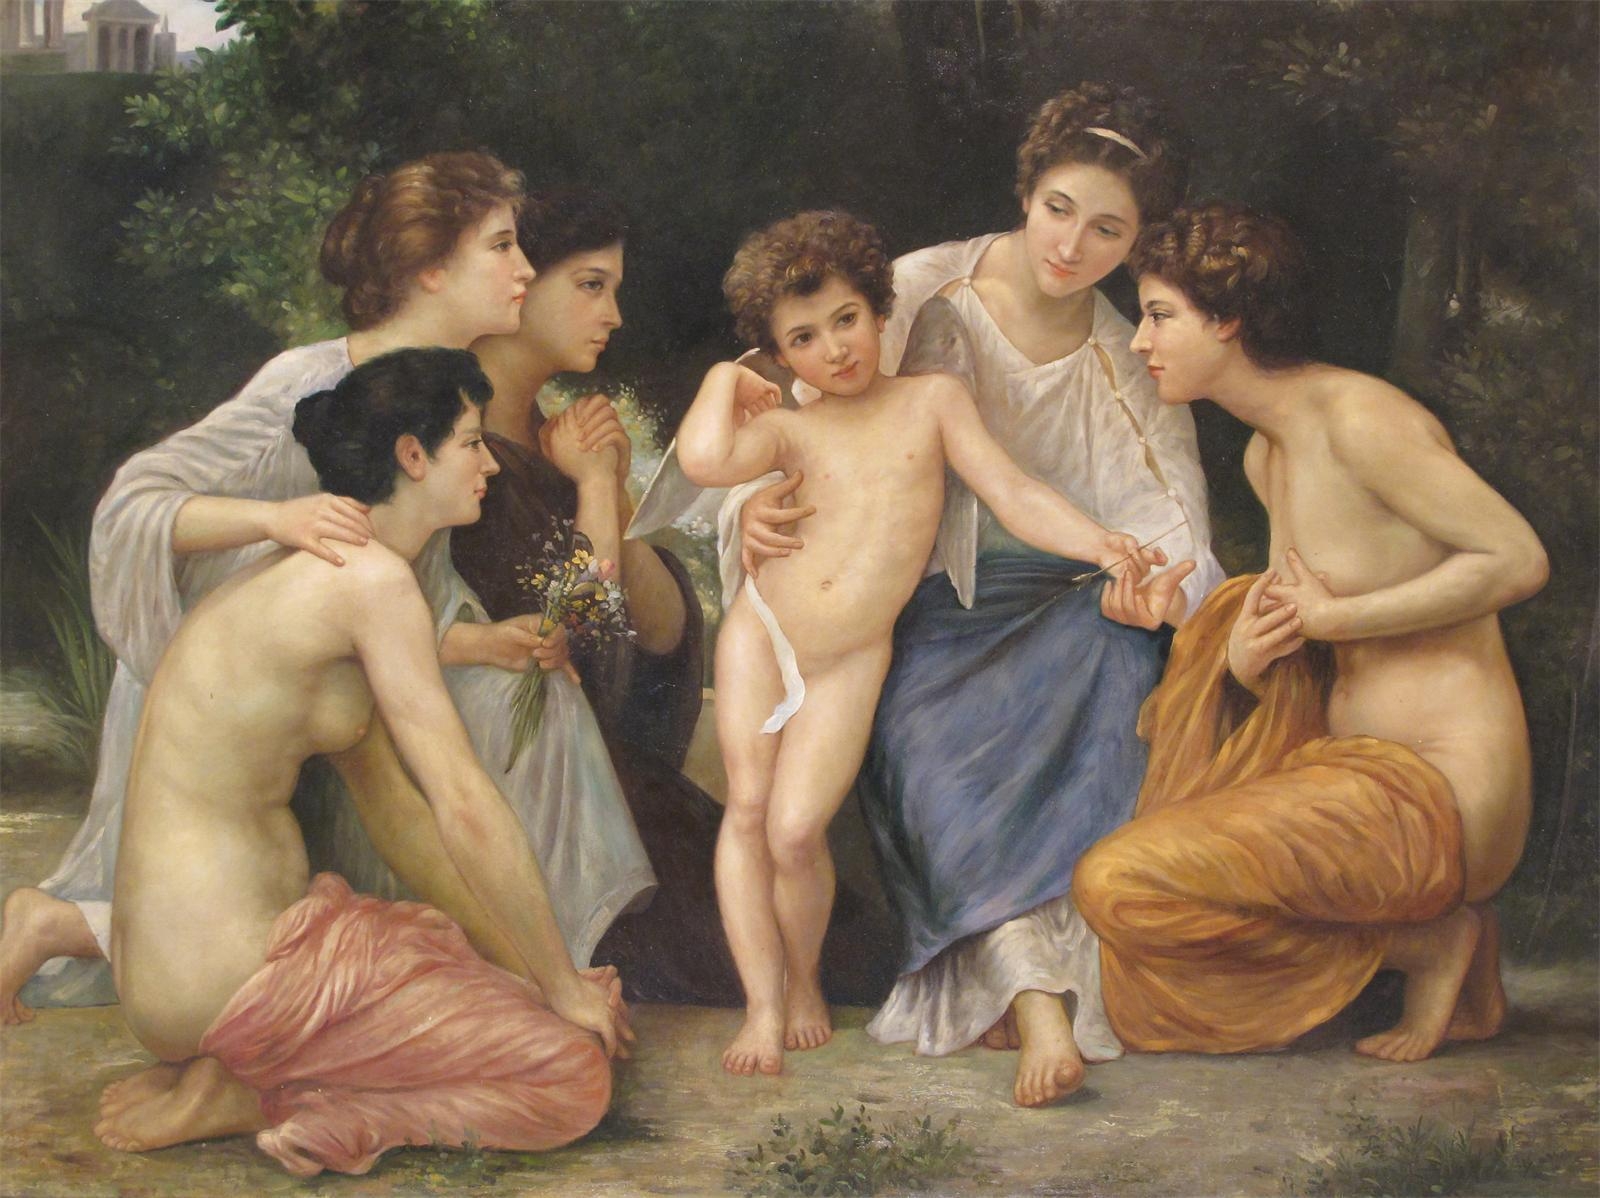 L'Admiration by William Adolphe Bouguereau, 1897